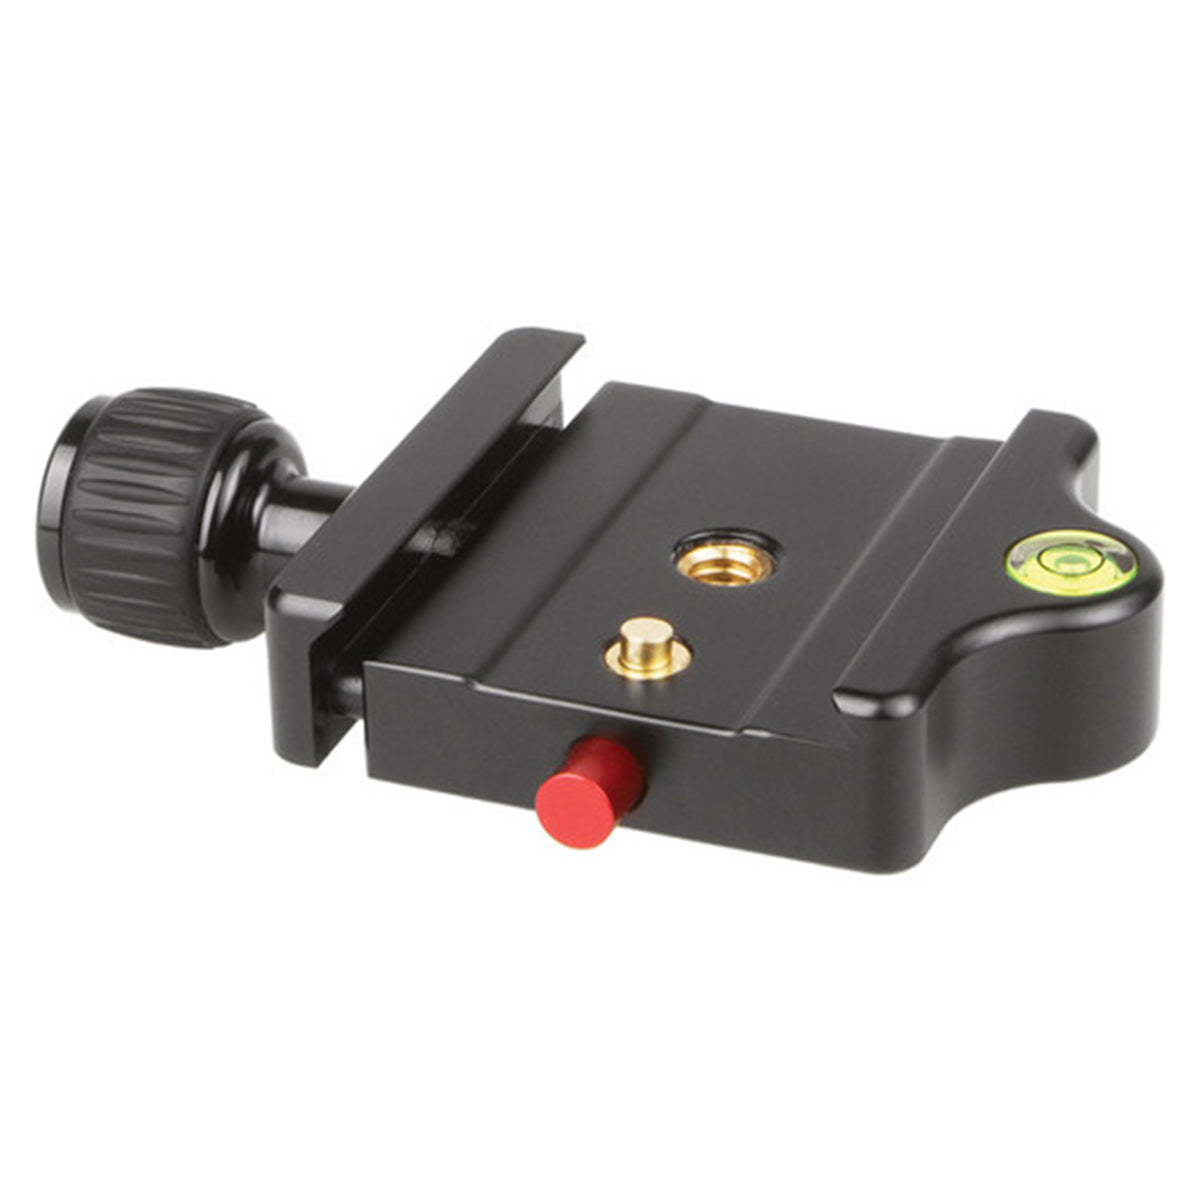 Sirui MP-20 Quick Release Plate Adapter by Sirui | Optics - goHUNT Shop